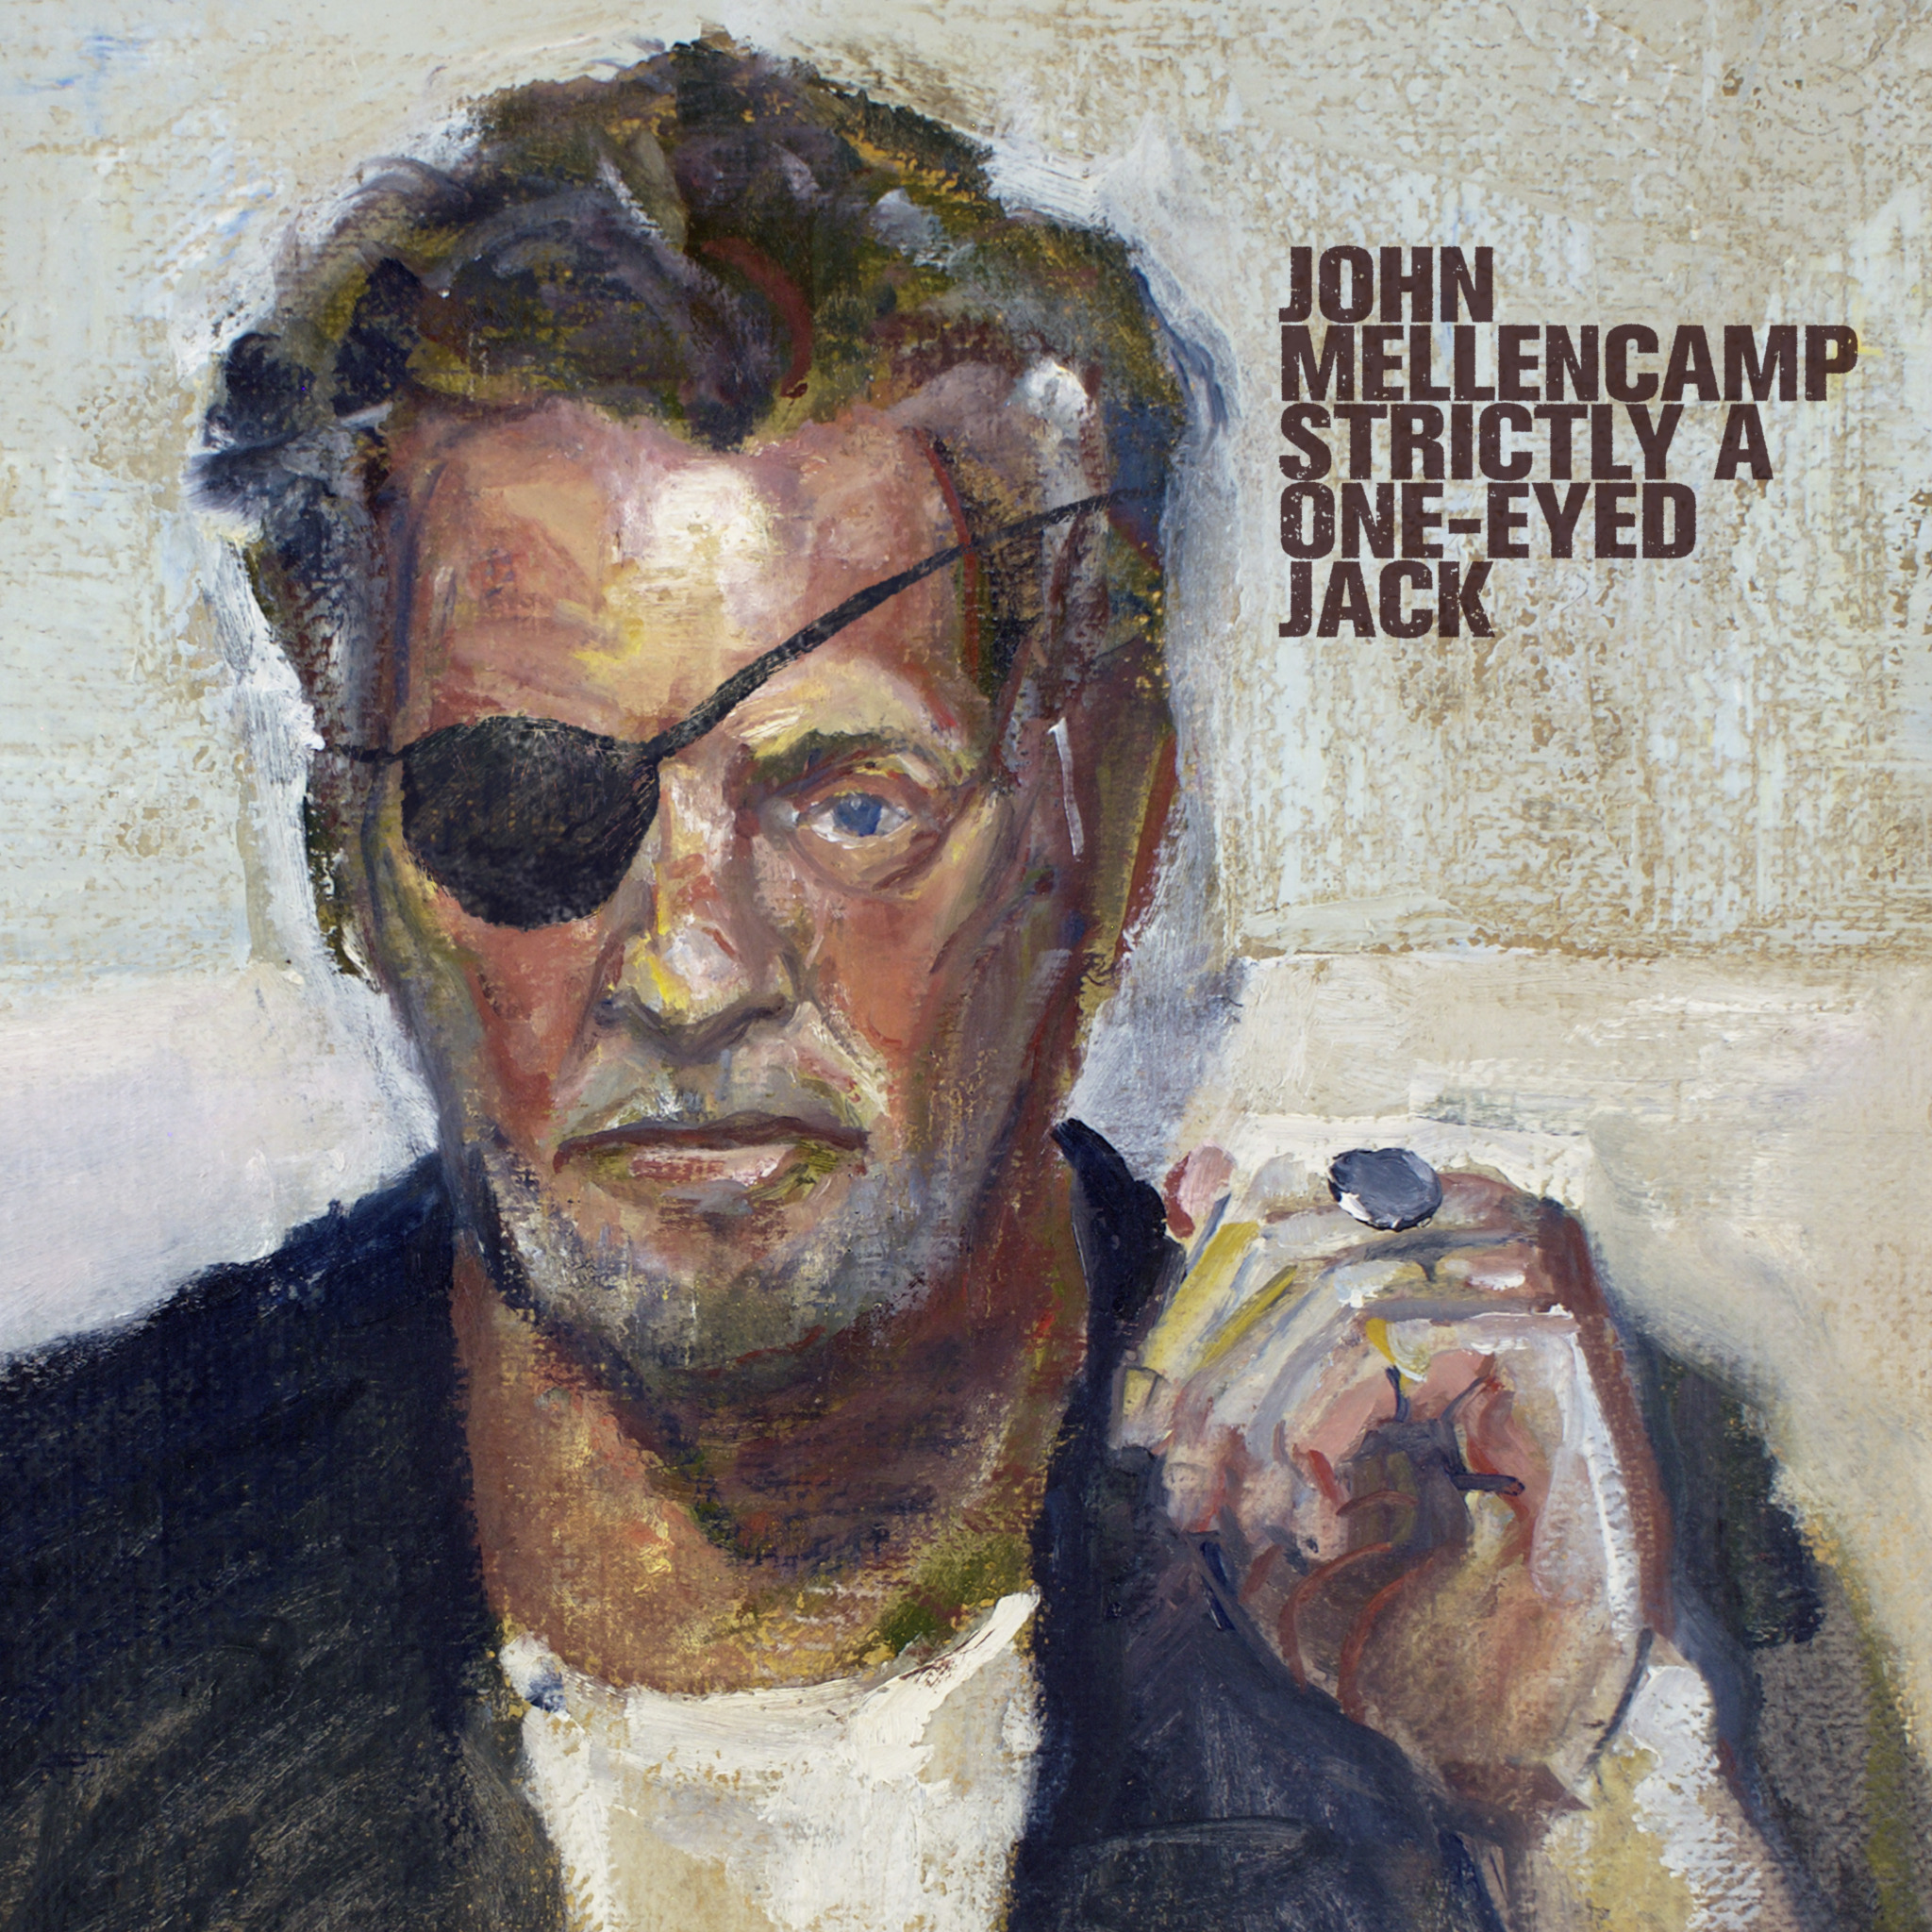 JOHN MELLENCAMP’S NEW LP STRICTLY A ONE-EYED JACK OUT JANUARY 21